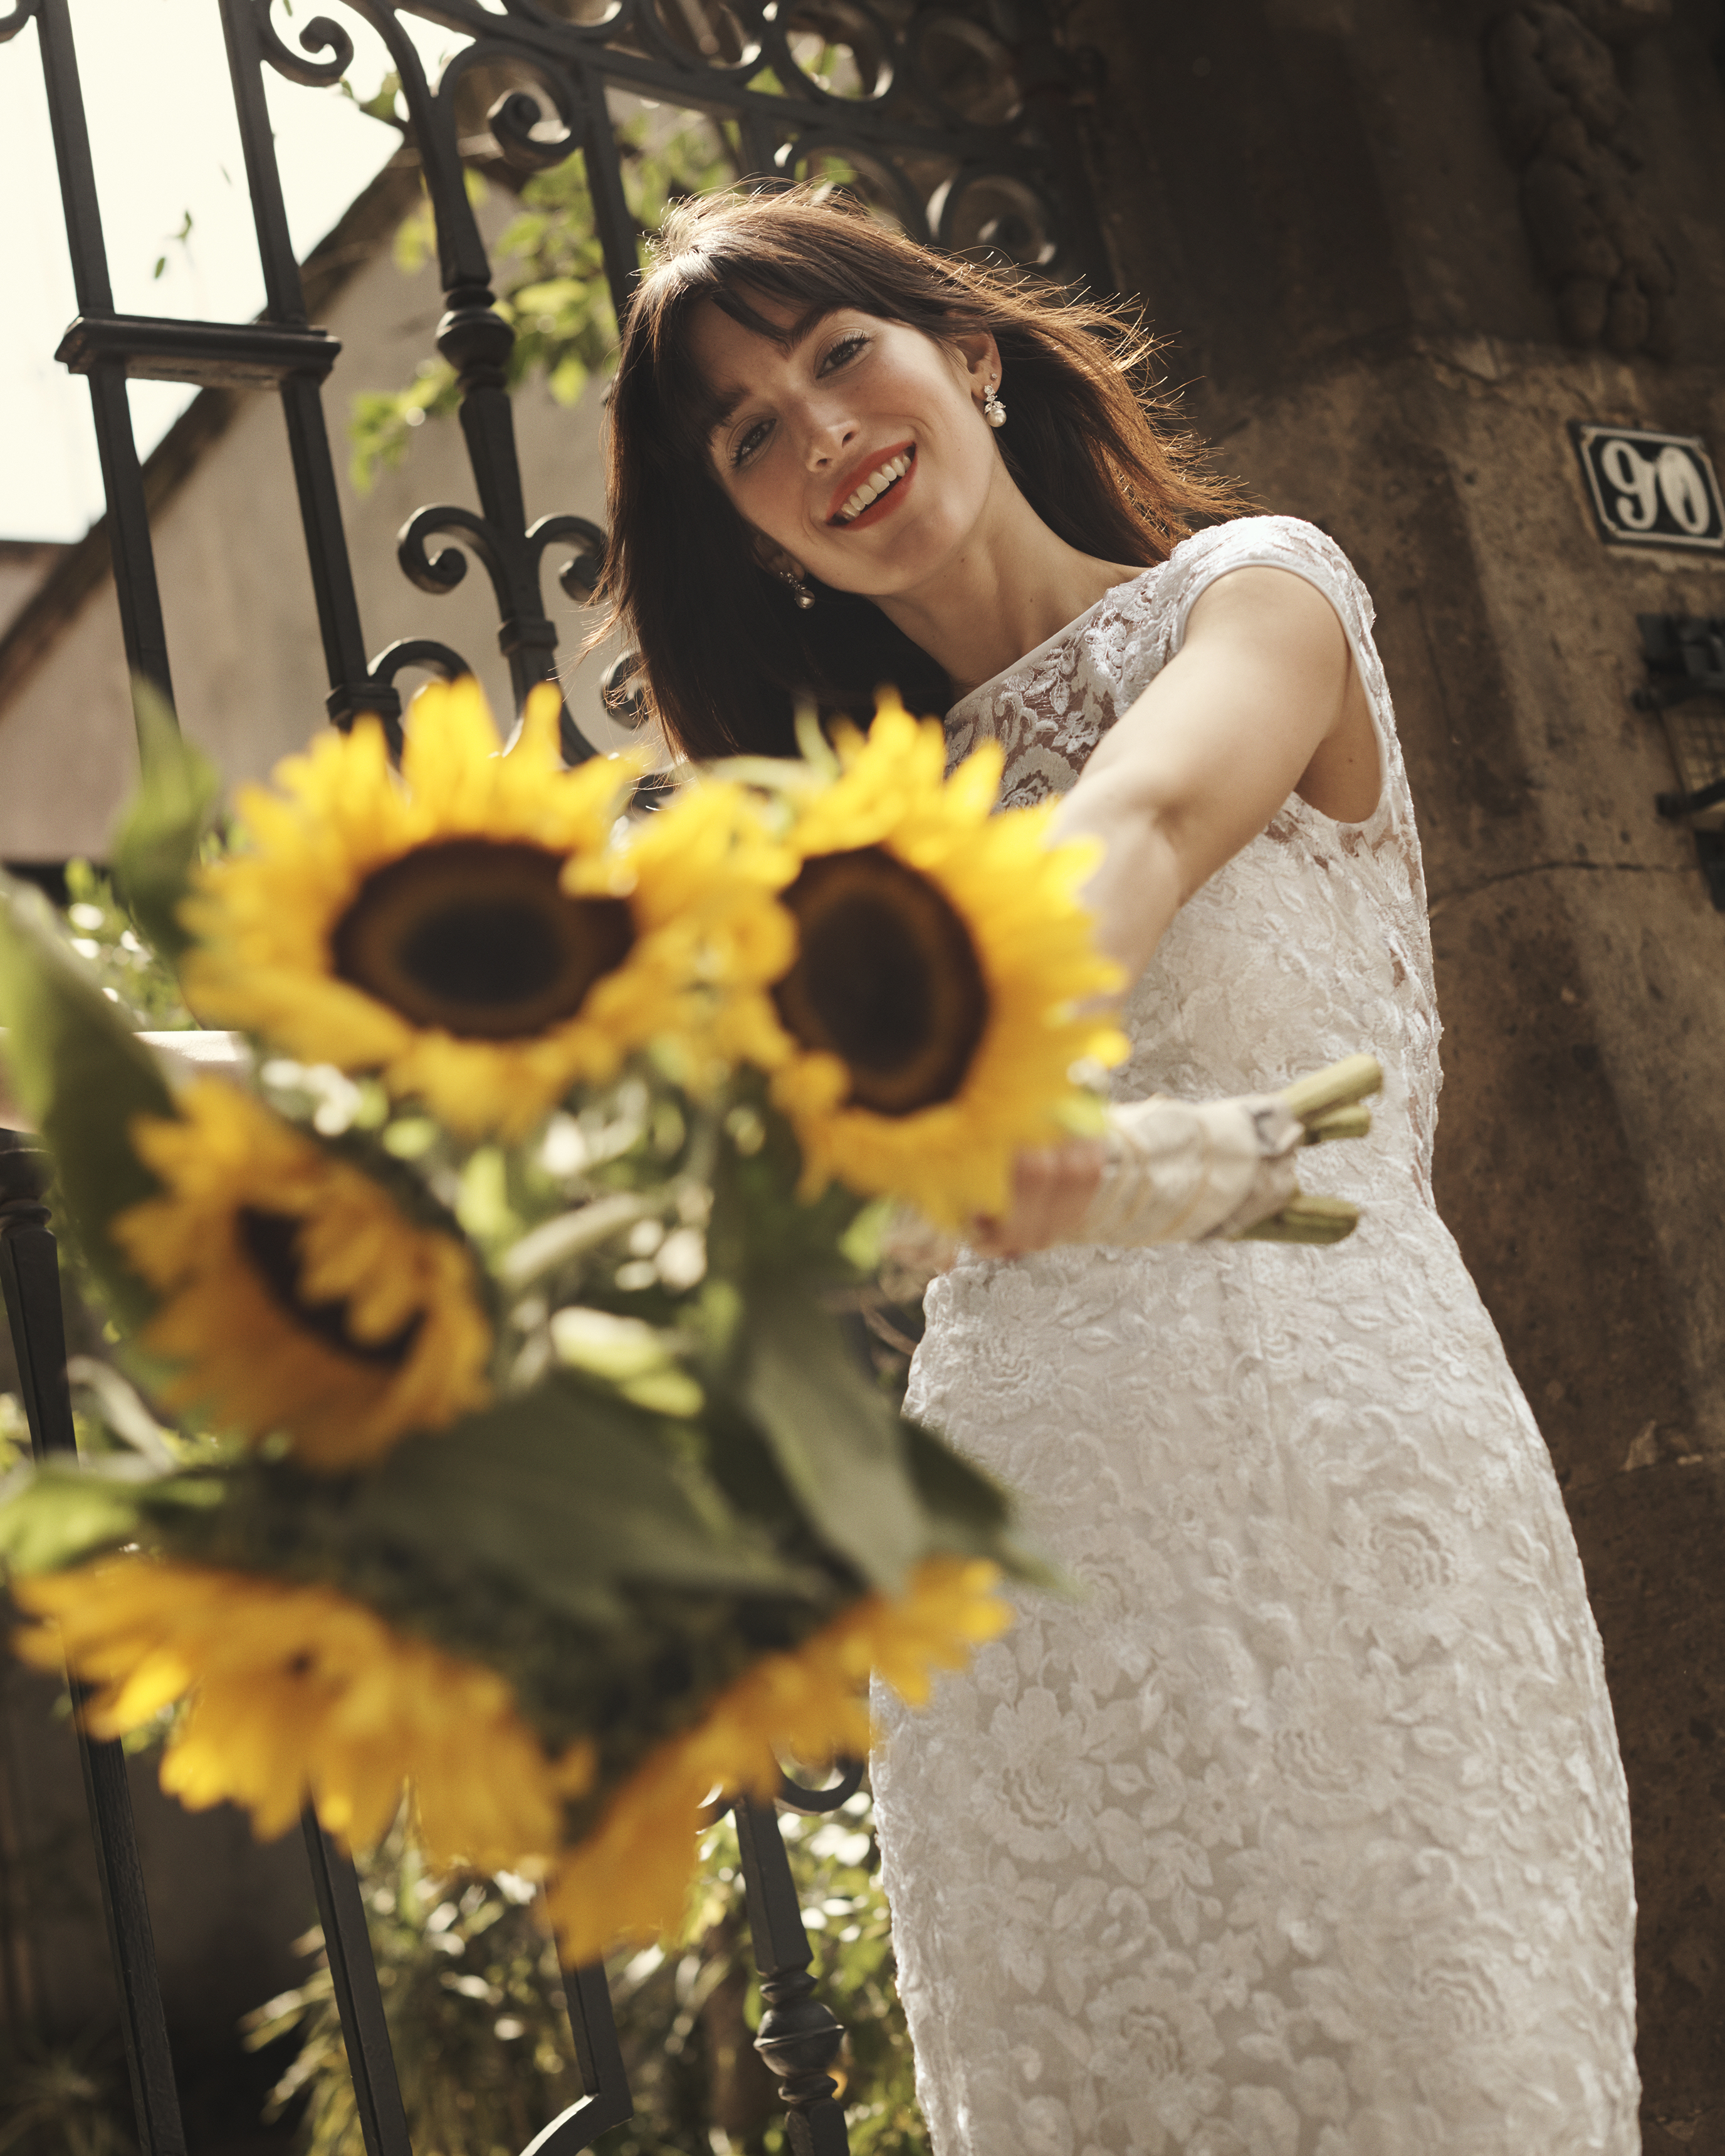 Smiling bride in long lace dress holding sunflowers towards camera.